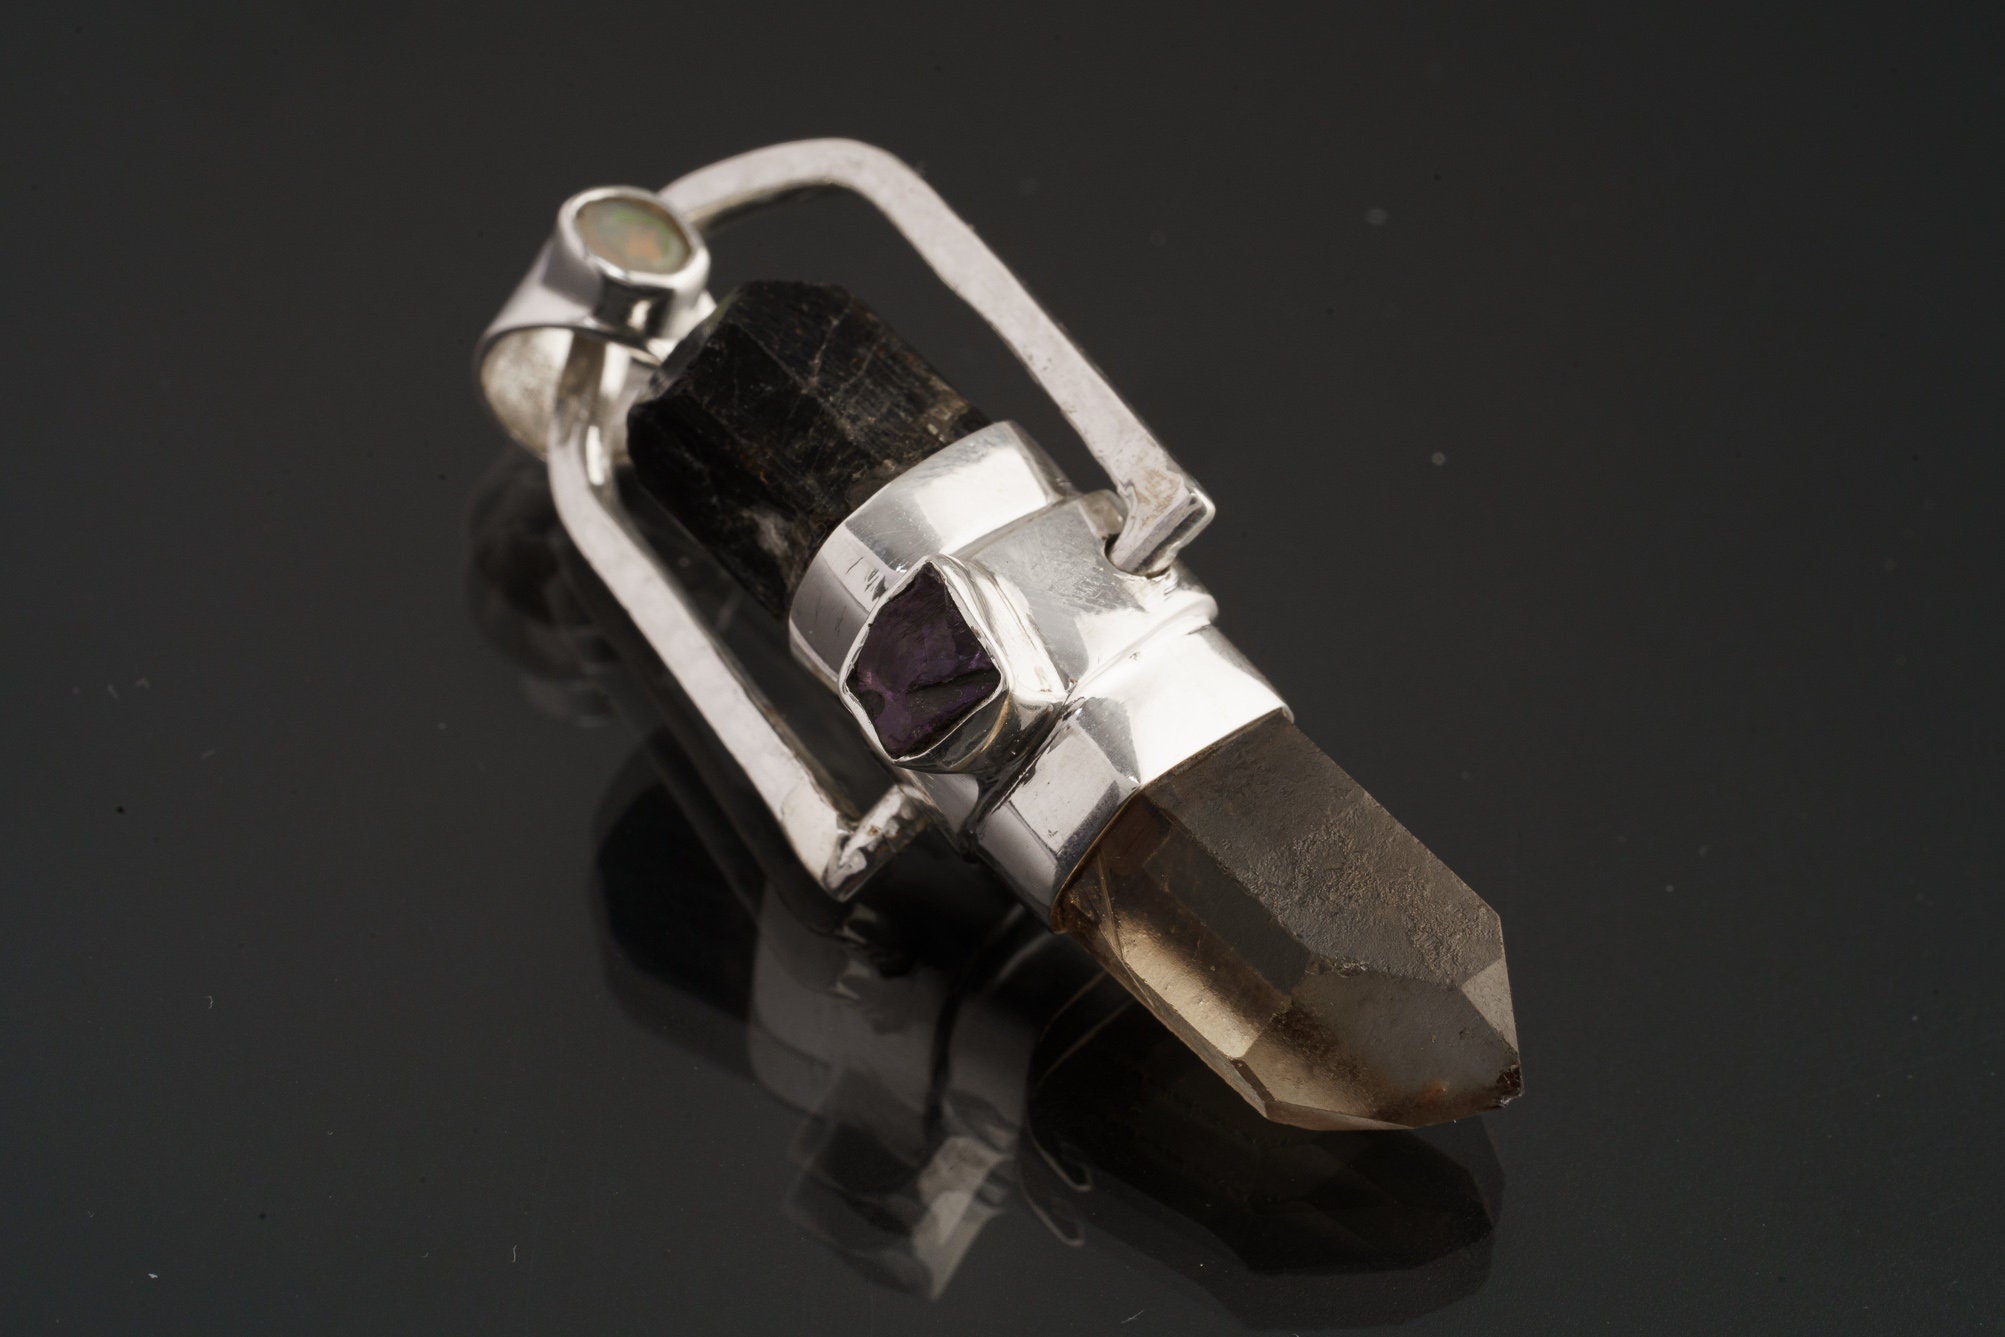 Terminated Black Tourmaline & Citirine dressed with a Ethiopian Opal, Labradorite, Amethyst - Sterling Silver Set - Spinning Crystal Pendant